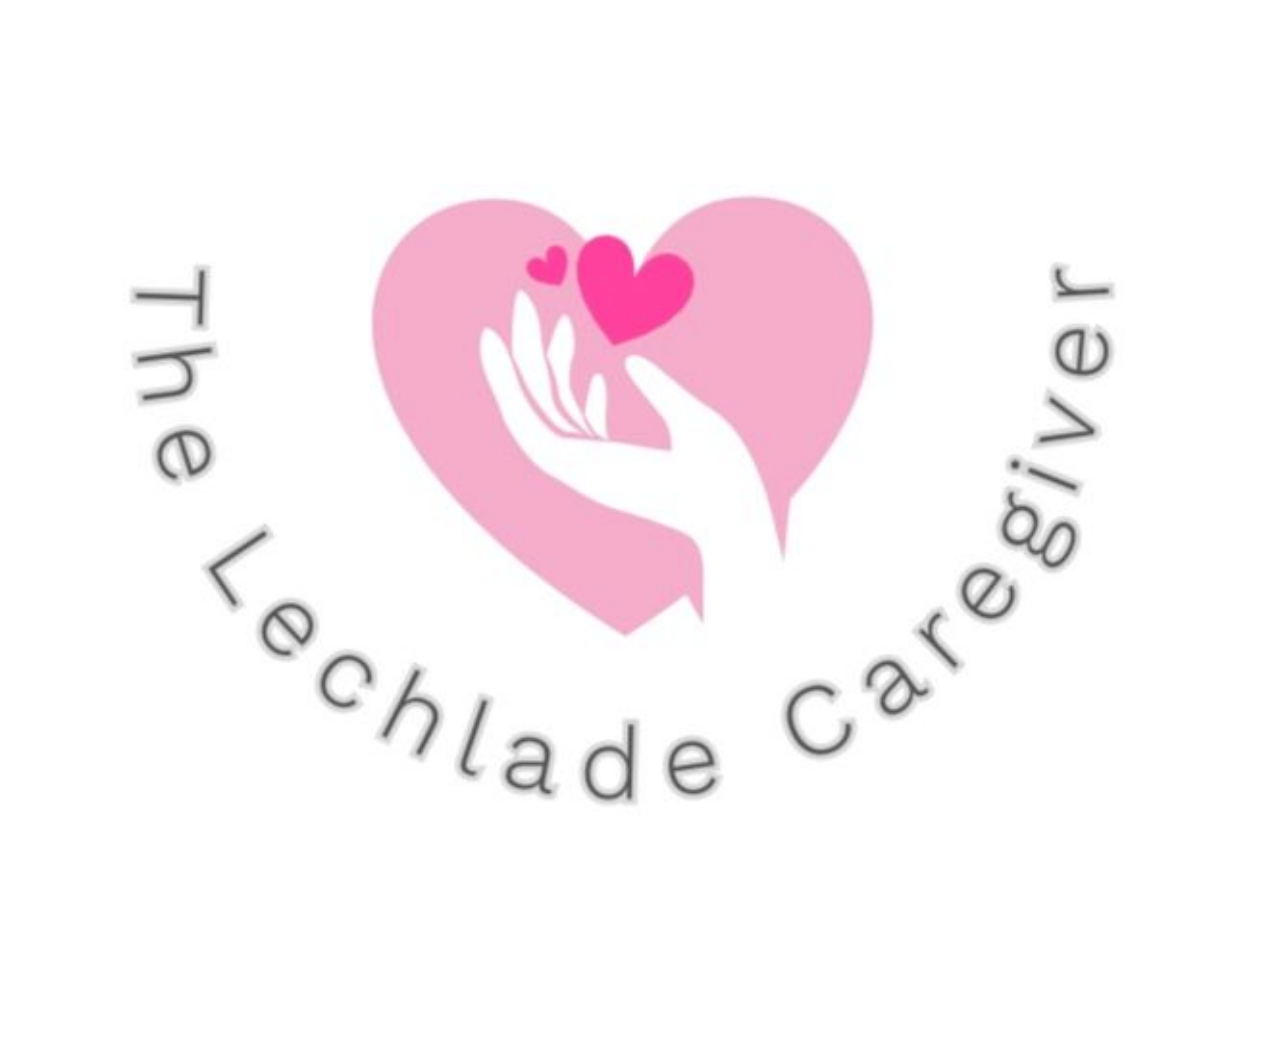 thelechladecaregiver's logo